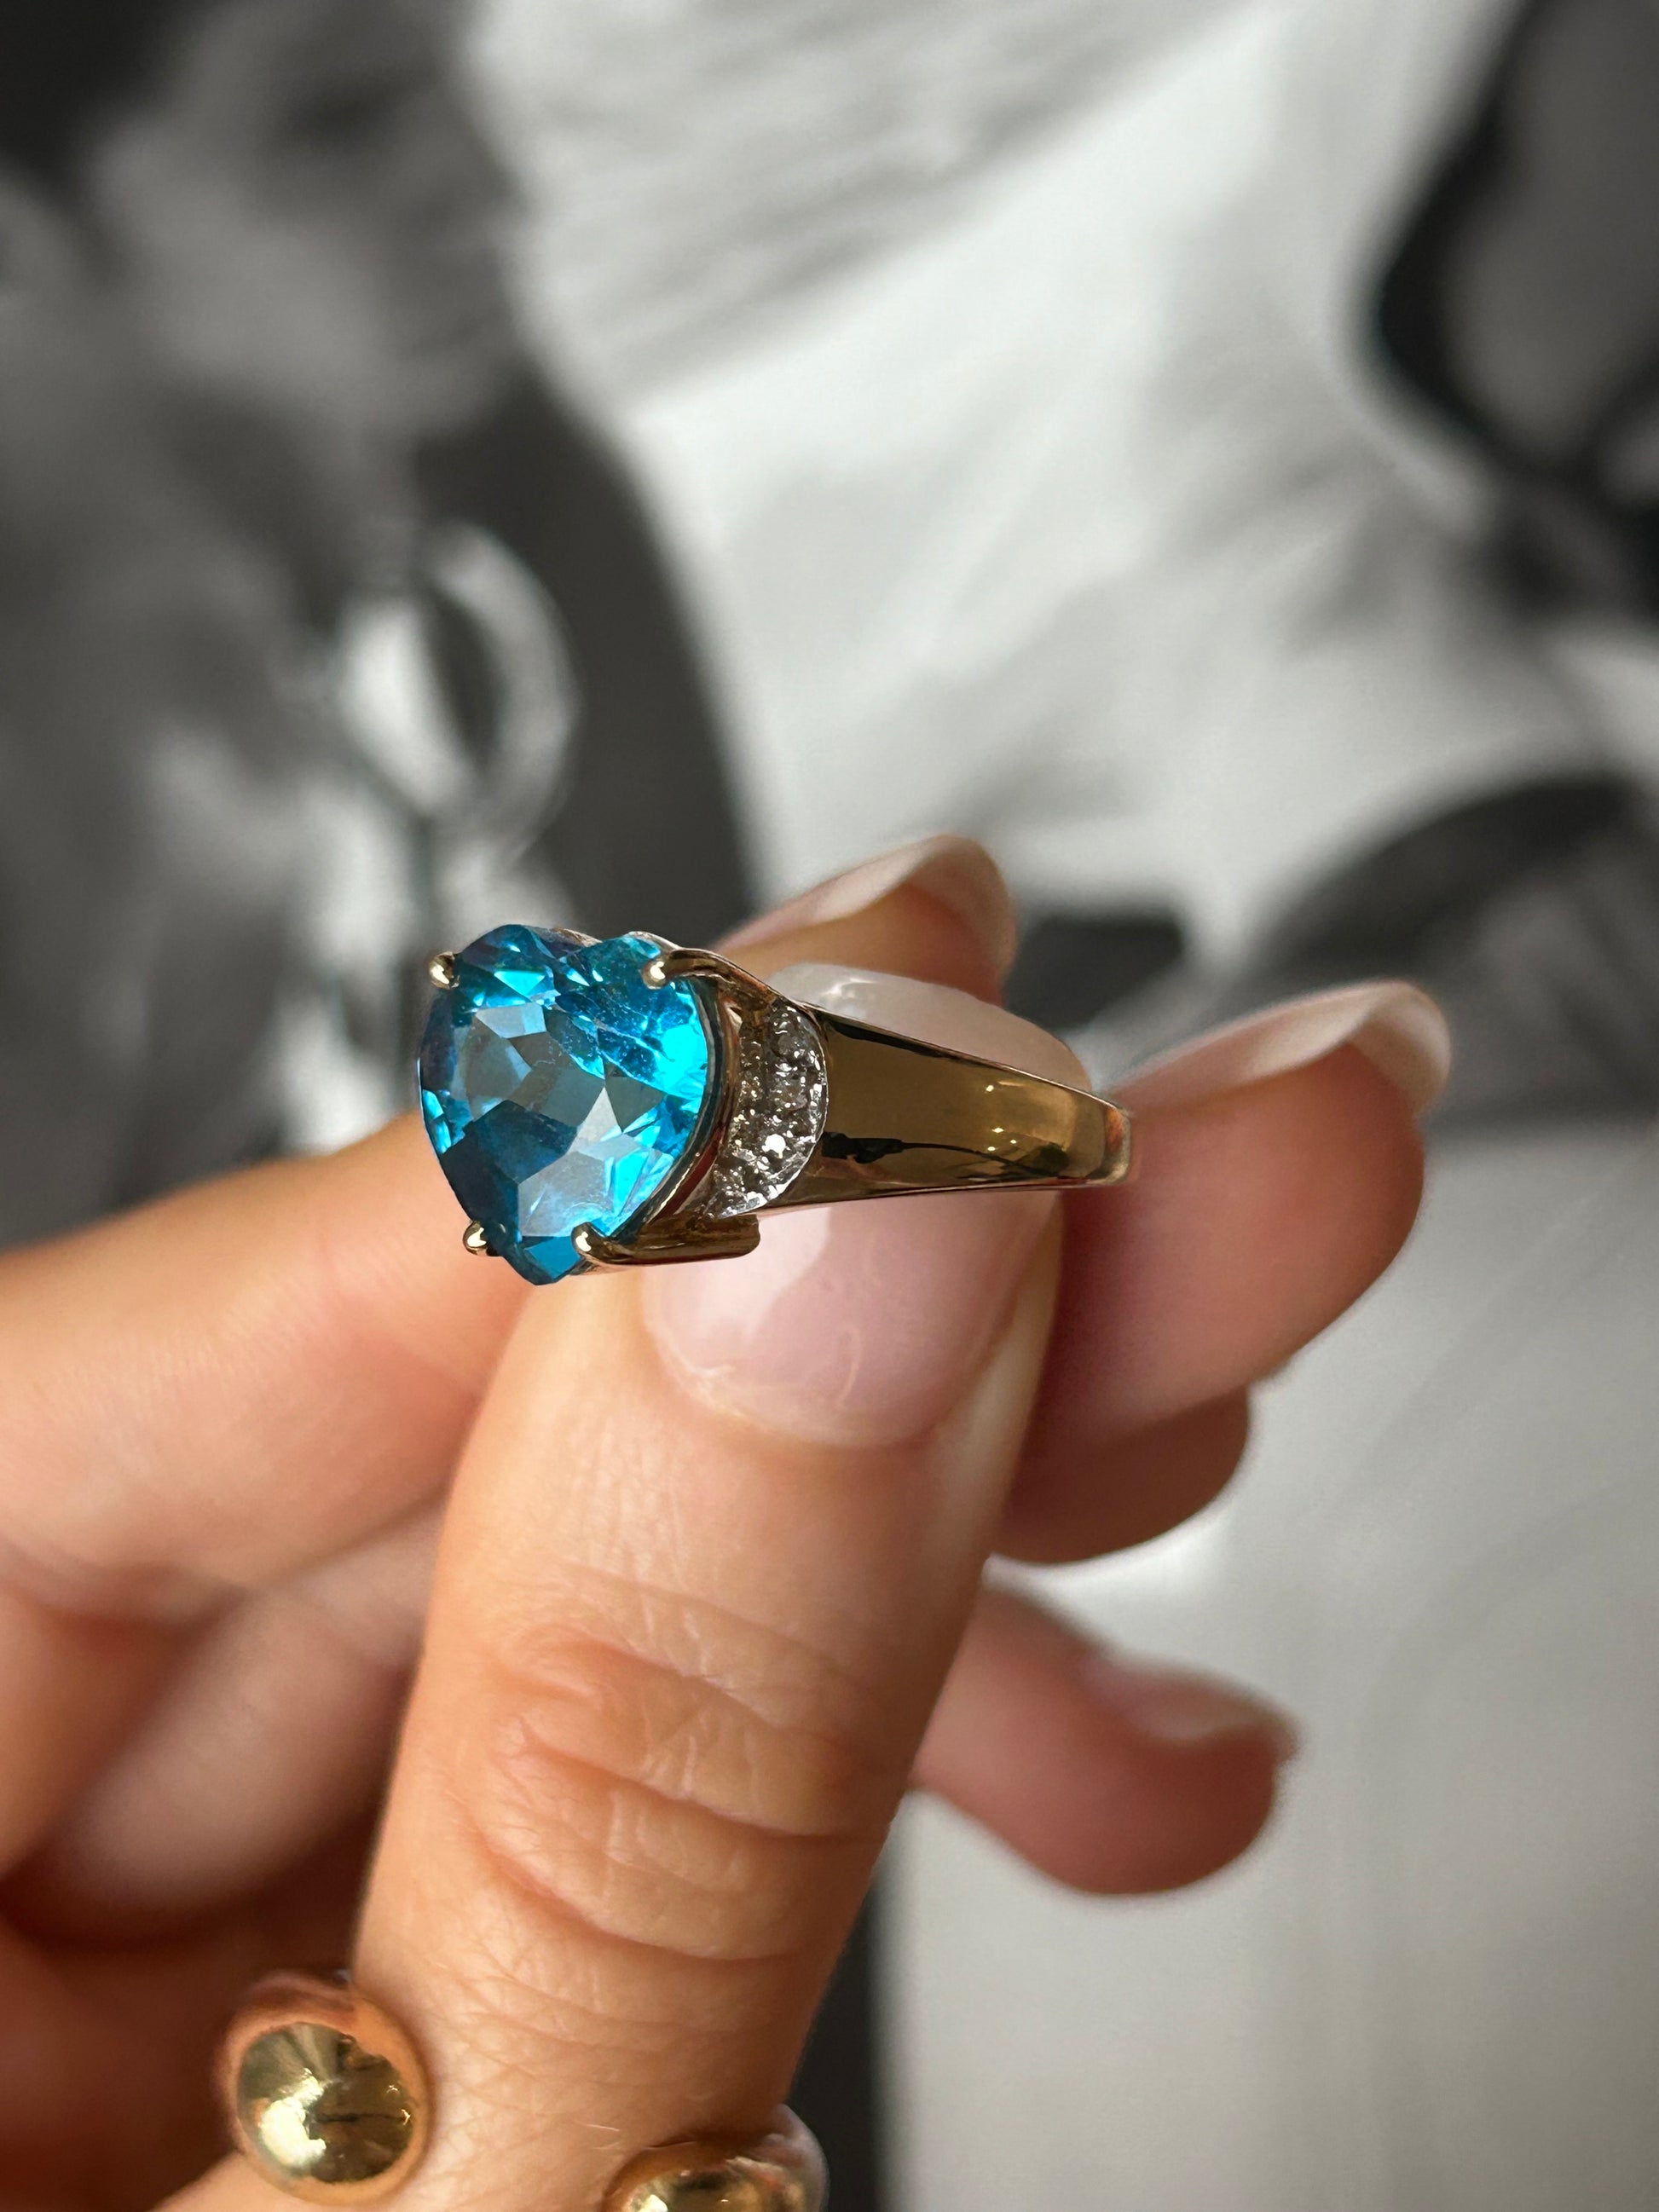 9ct Yellow Gold Blue Heart Topaz and Diamond Ring